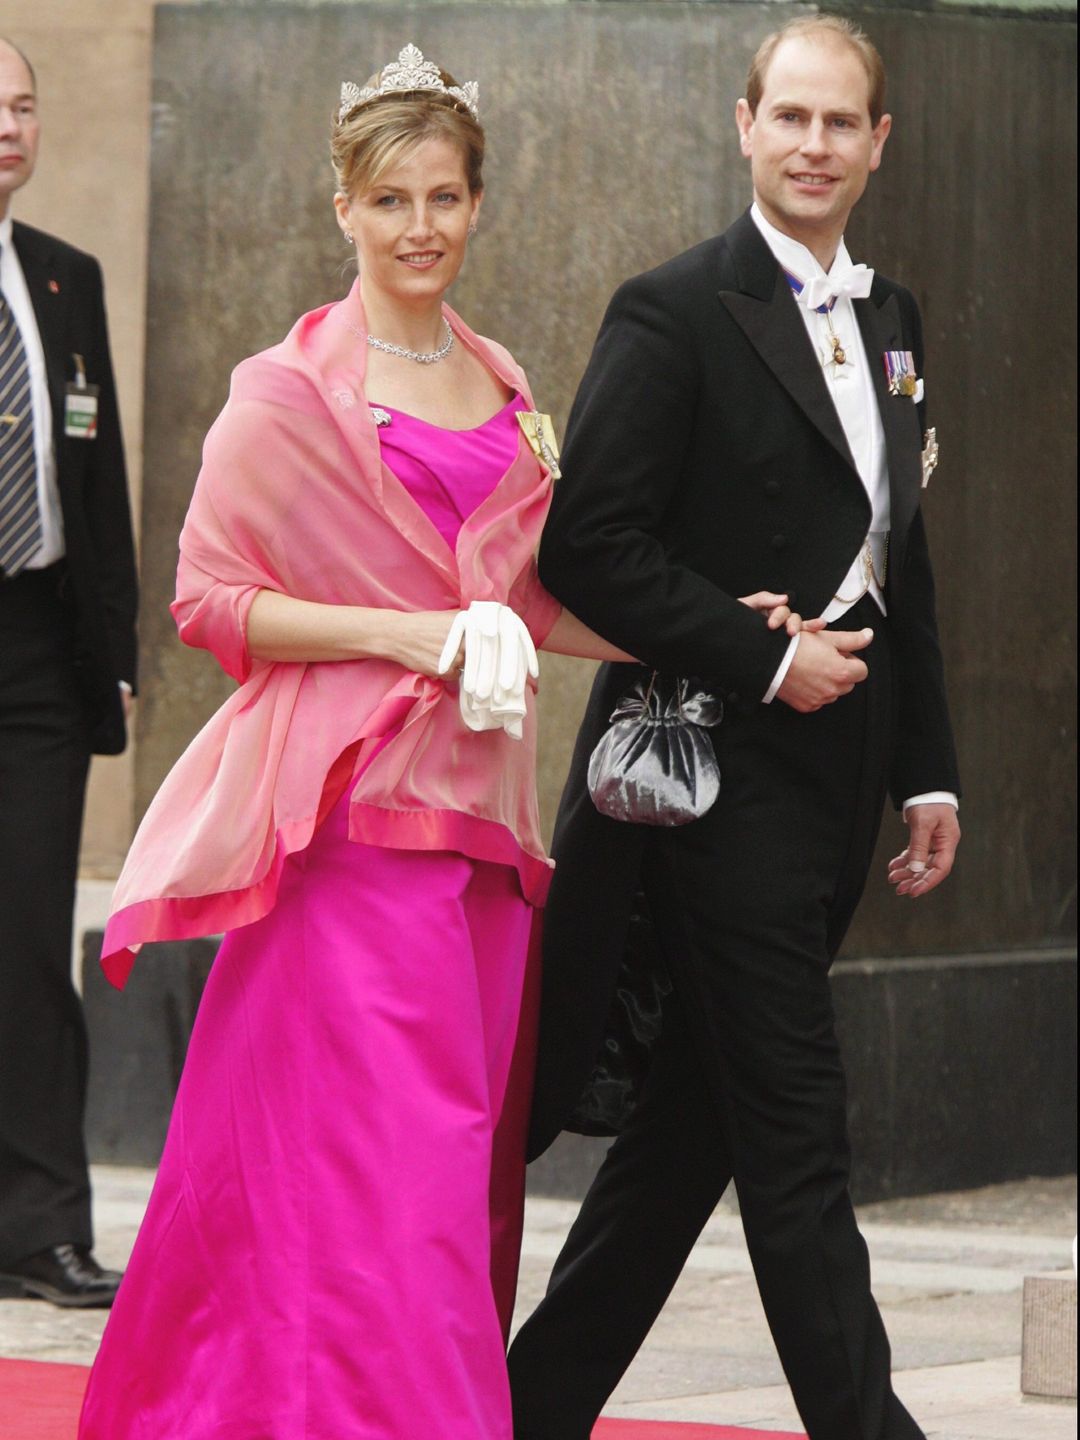 The Duchess of Edinburgh in a pink dress and a tiara with Prince Edward